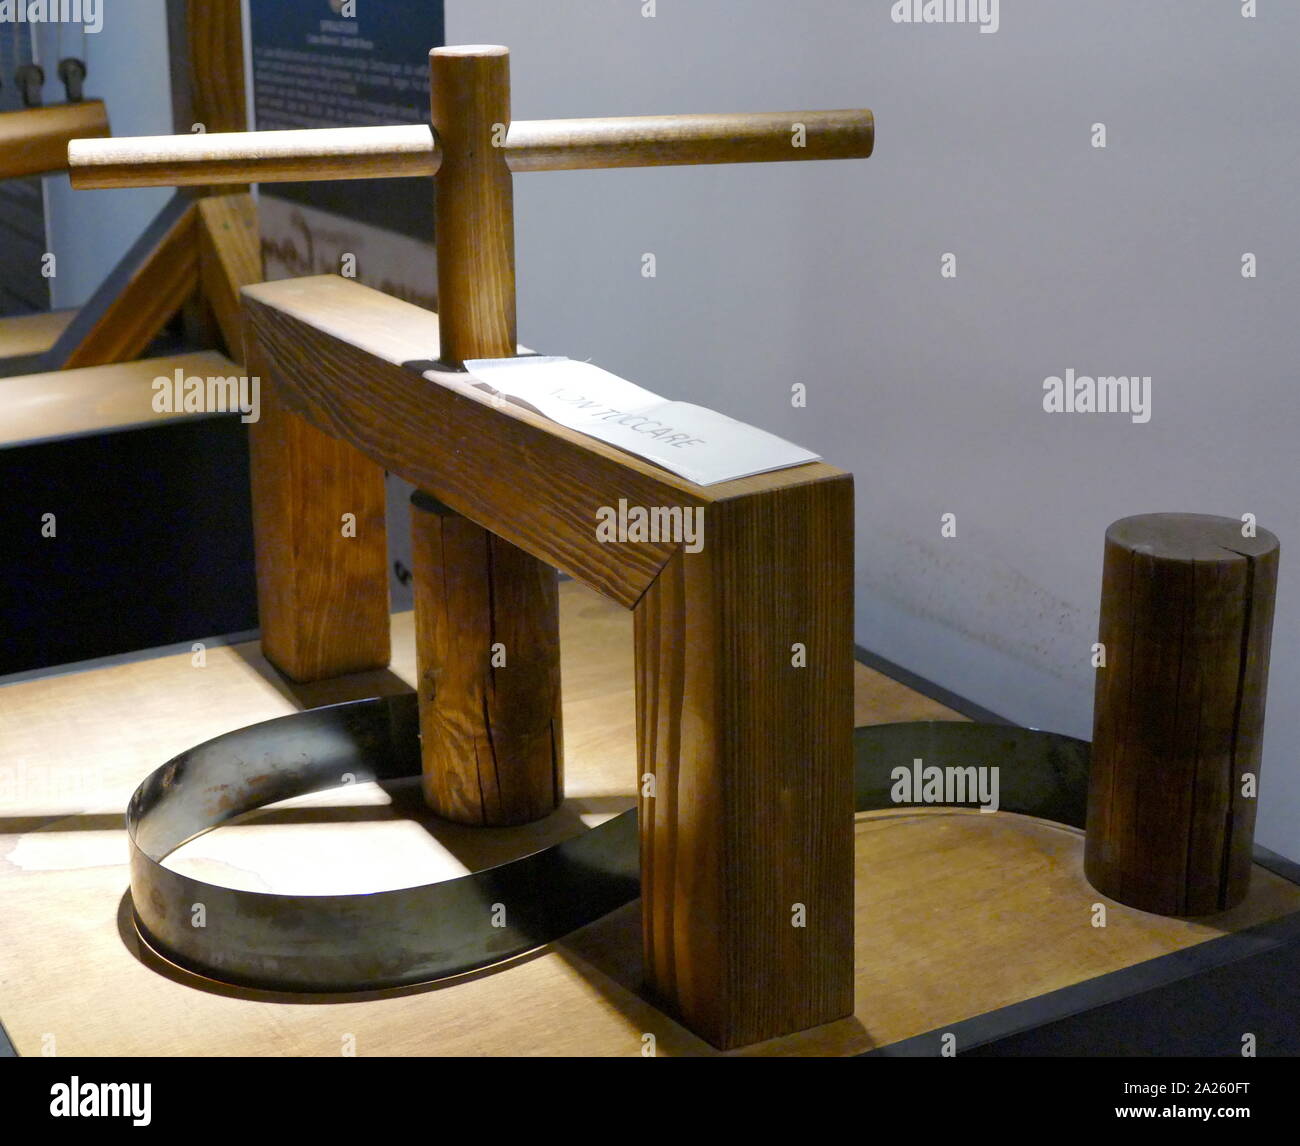 model of Leonardo Da Vinci's mechanism, for an ELASTIC SPRING illustrating various types of springs and different ways to load them: this model is an interpretation of one of these. Leonardo was aware that the spring is a source of energy, just as he was aware that the propulsion guaranteed by the various types of springs varied continuously. based on a drawing by Leonardo da Vinci (1452-1519), Italian artist and polymath. Madrid Codex I, folio 85 r. Stock Photo